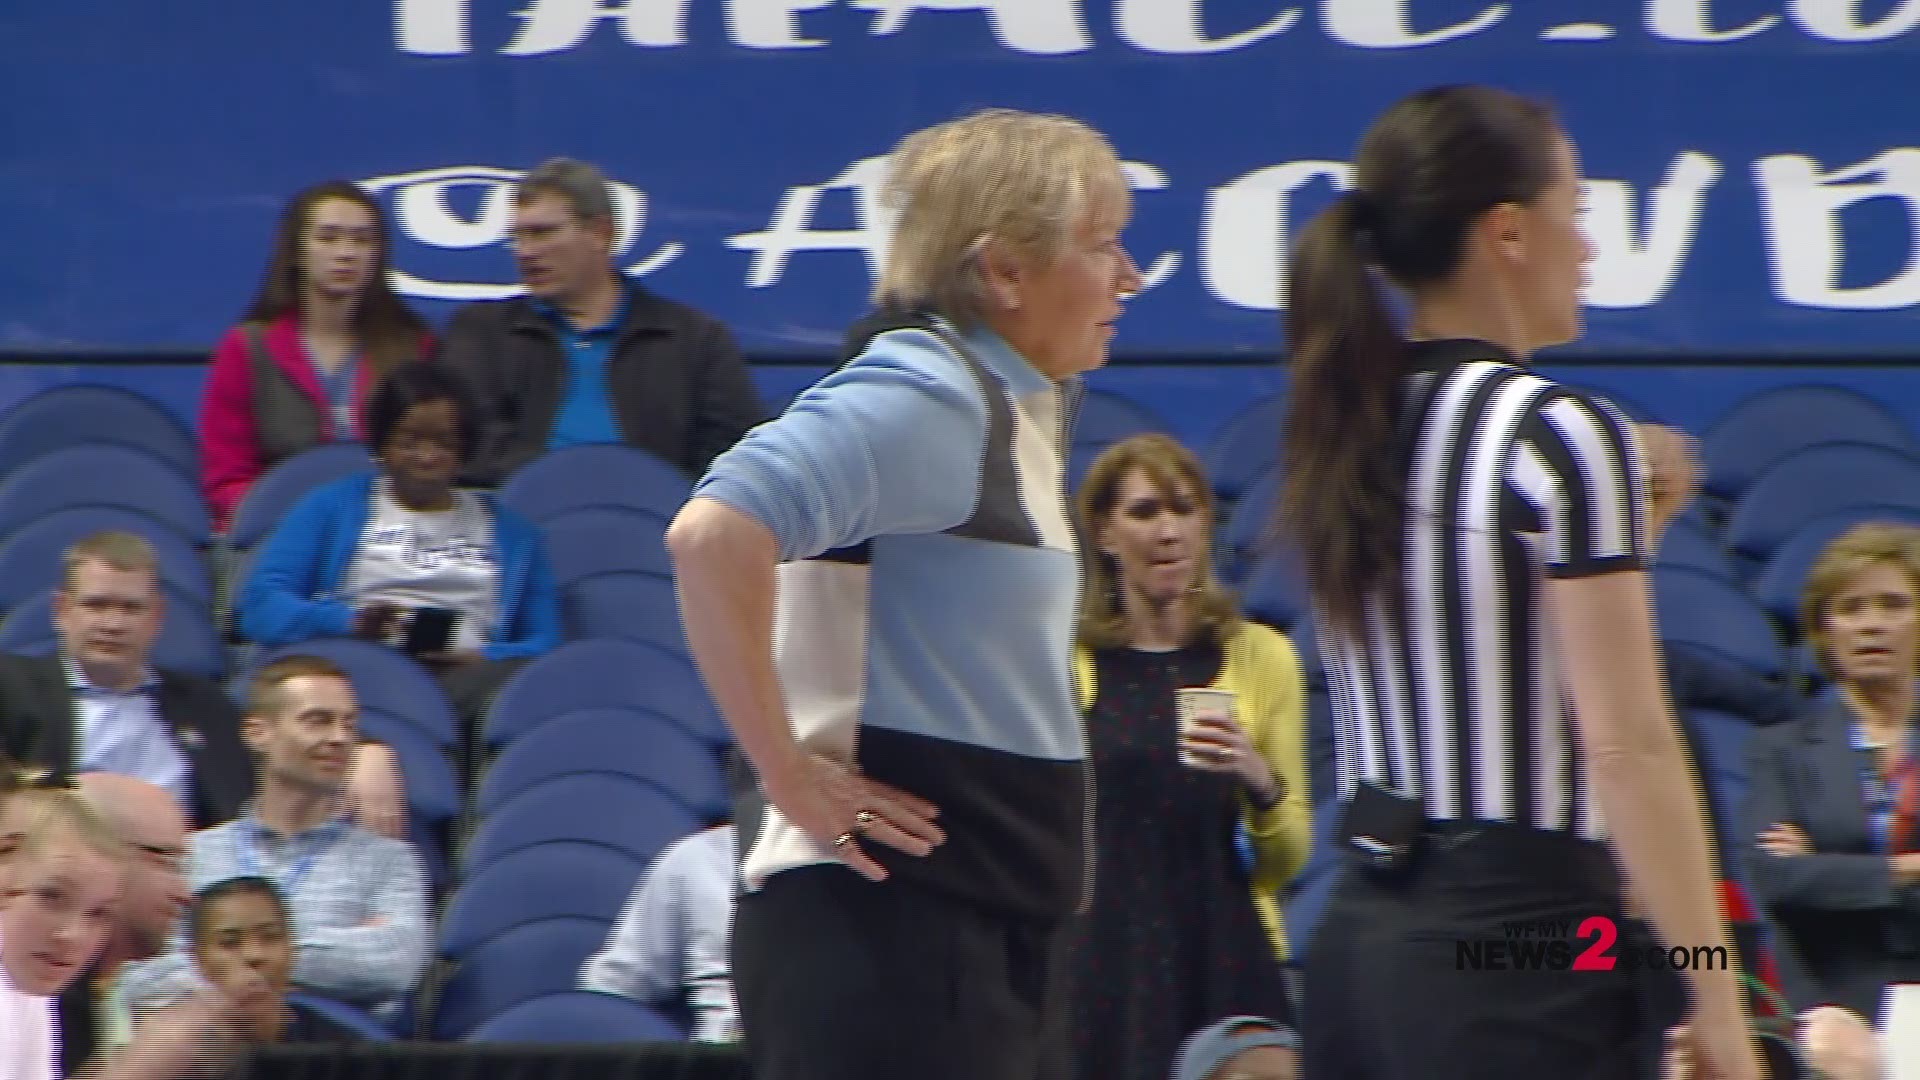 Officials at UNC-Chapel Hill announced Monday that the women's basketball coaching staff has been put on leave while an outside law firm reviewed and assessed "the culture" of the basketball program.